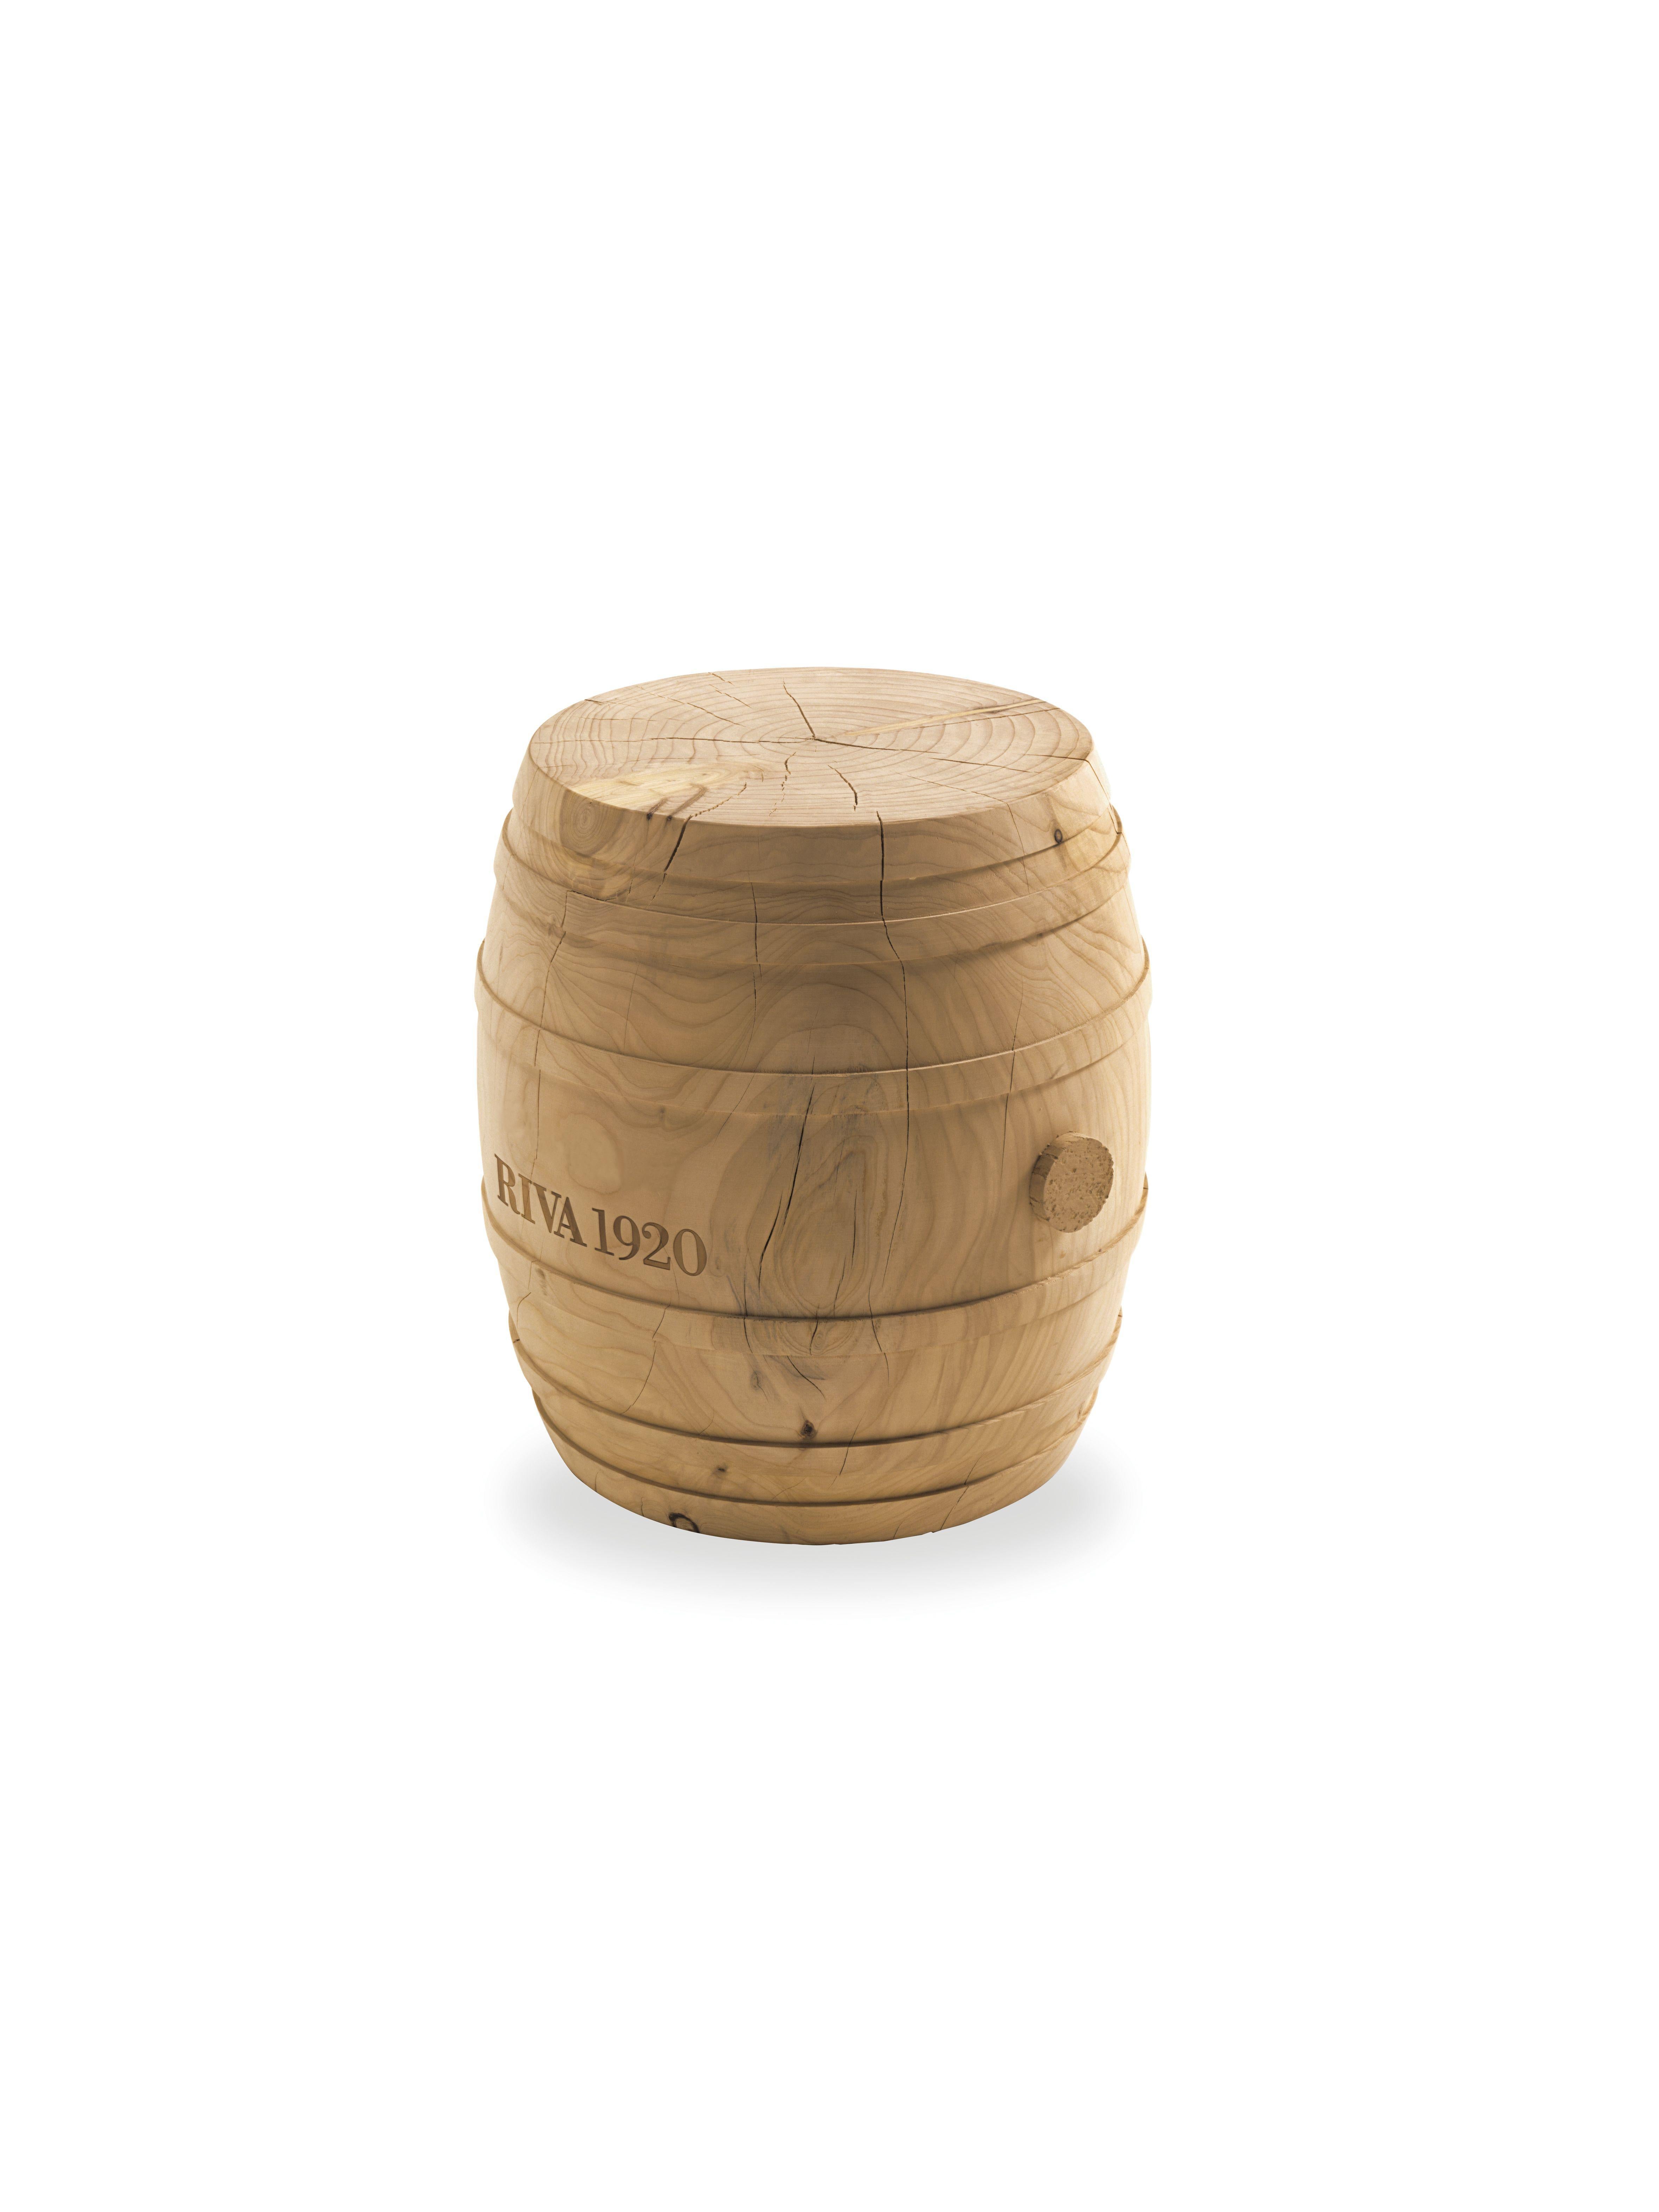 Stool made from a single block of scented cedar that is inspired by the shape of a circular barrel.